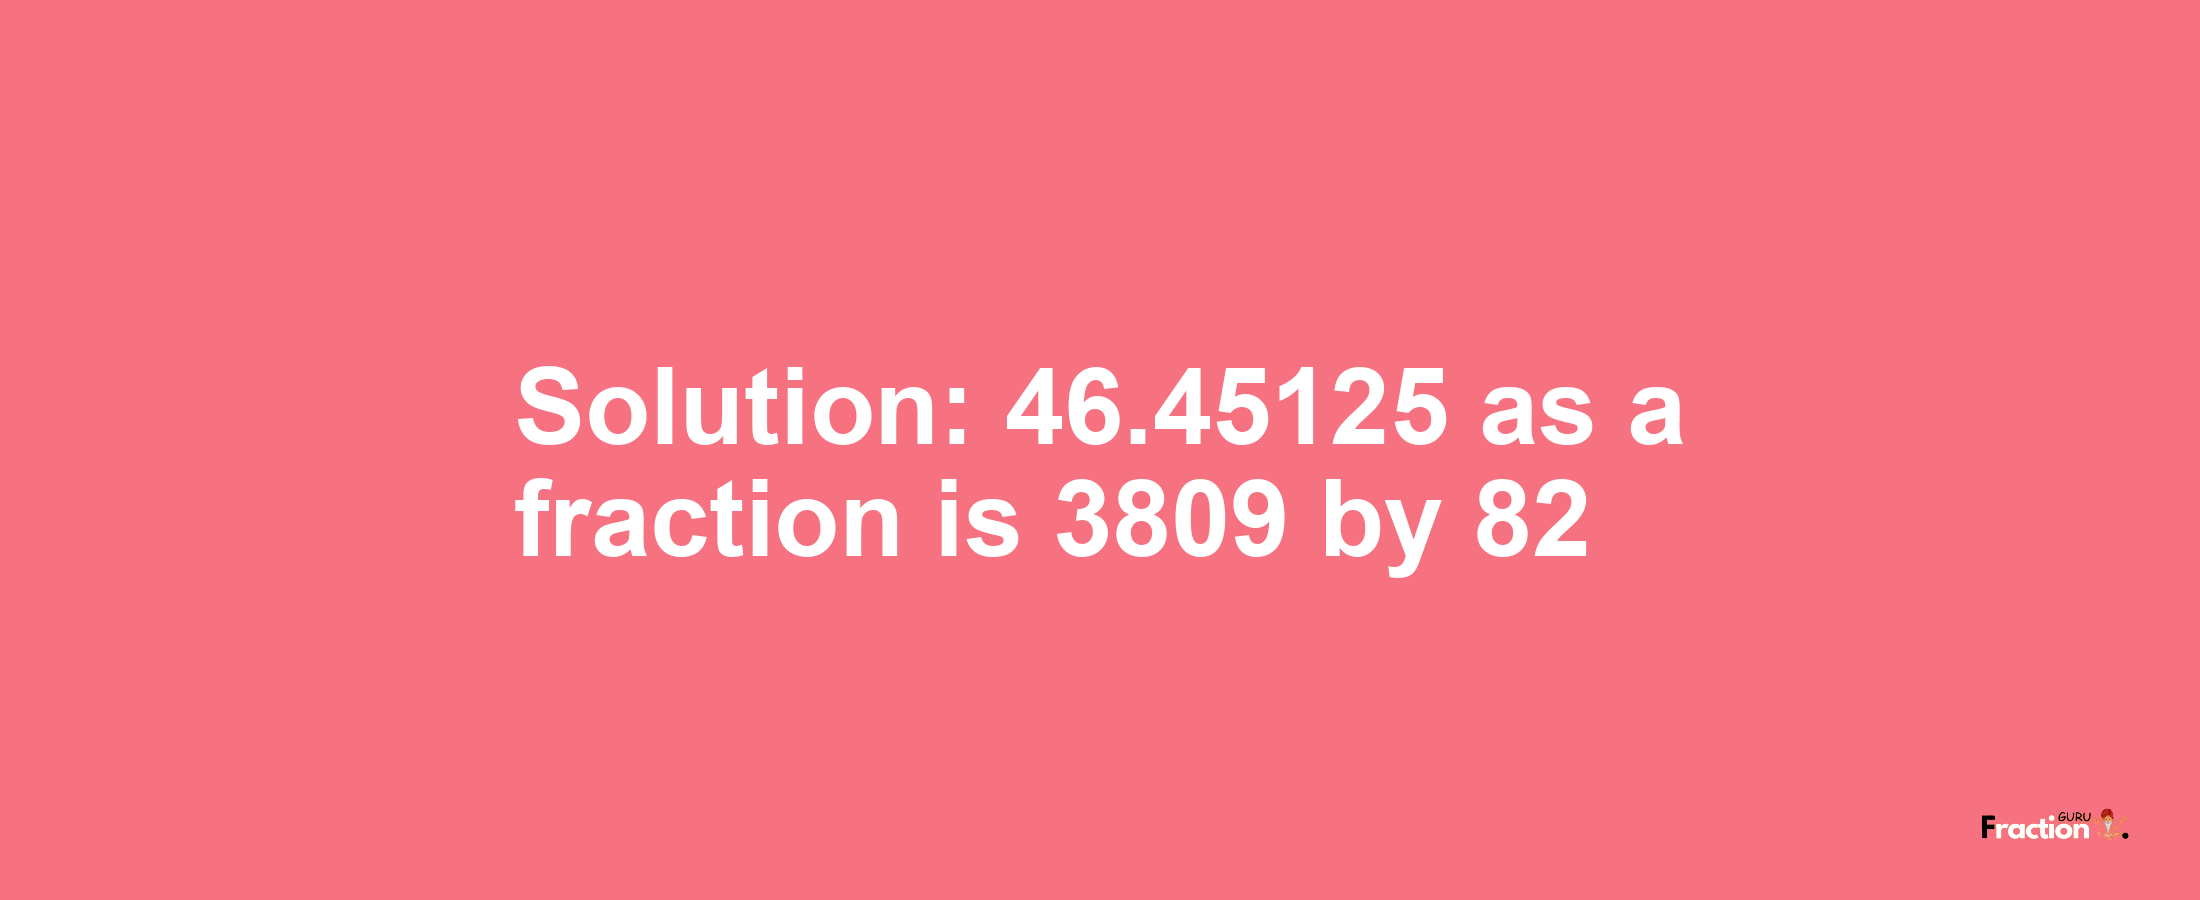 Solution:46.45125 as a fraction is 3809/82